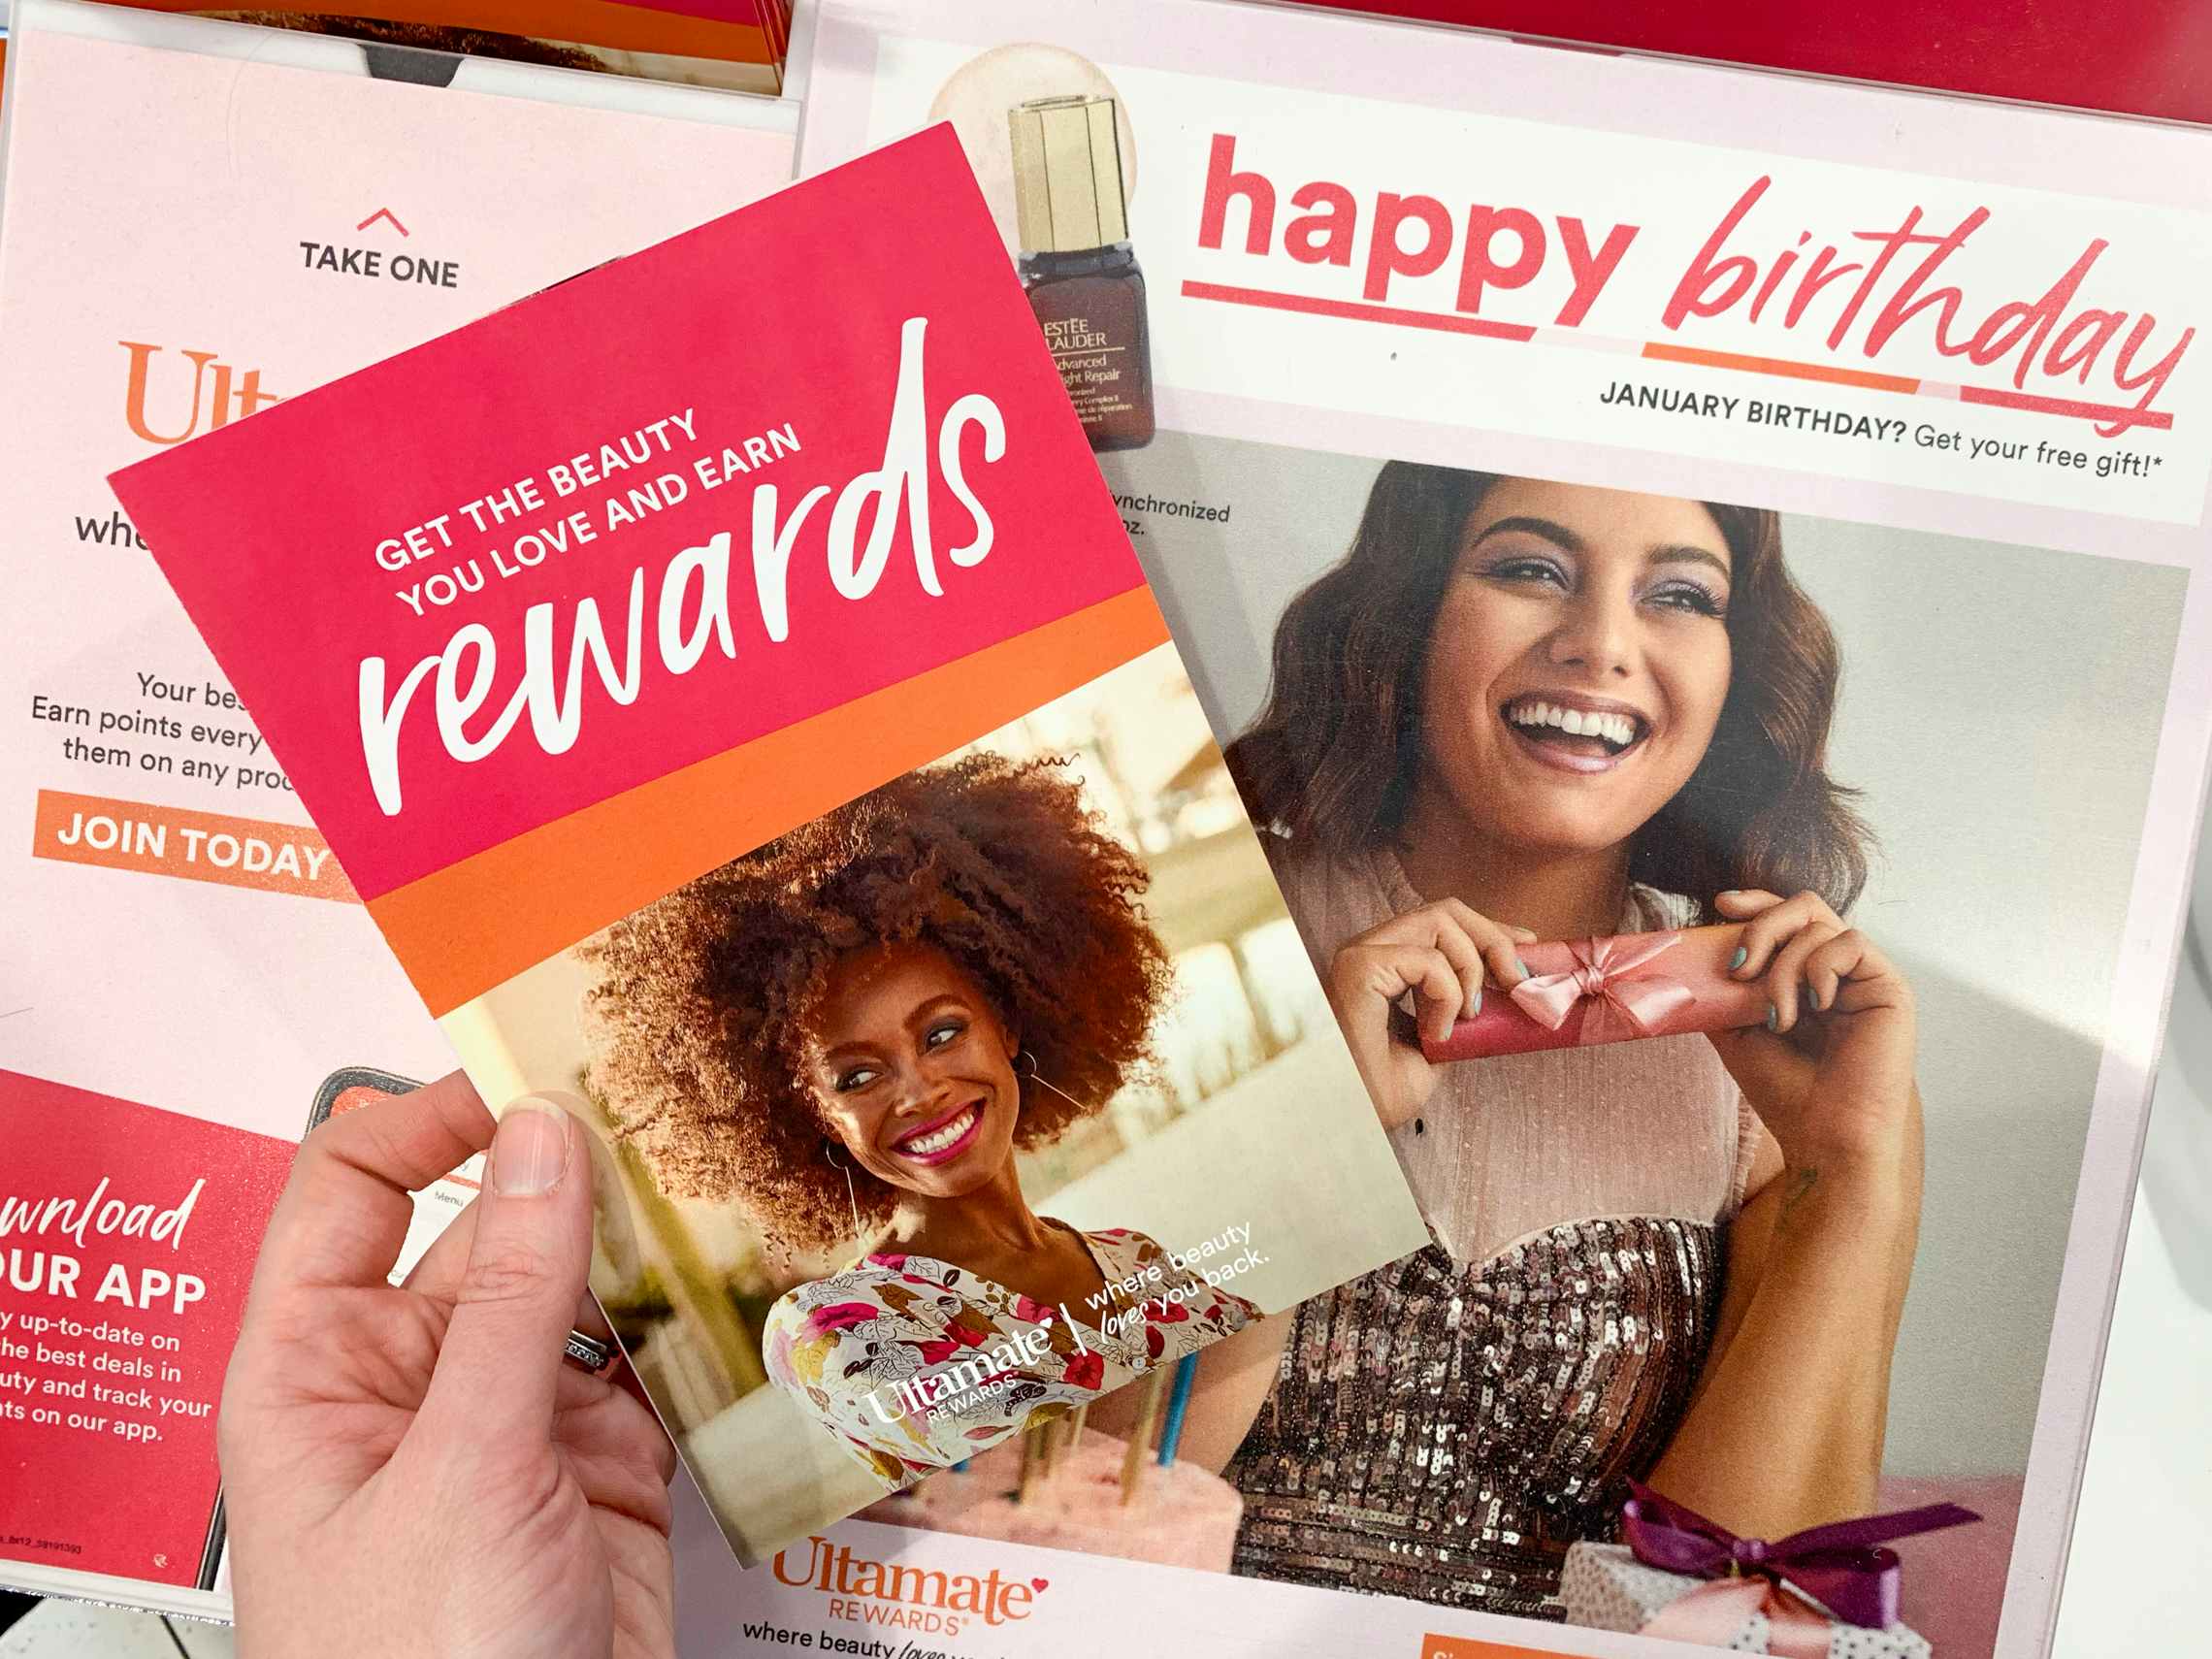 An Ulta rewards brochure held in front of a sign for a "Happy Birthday" free gift.